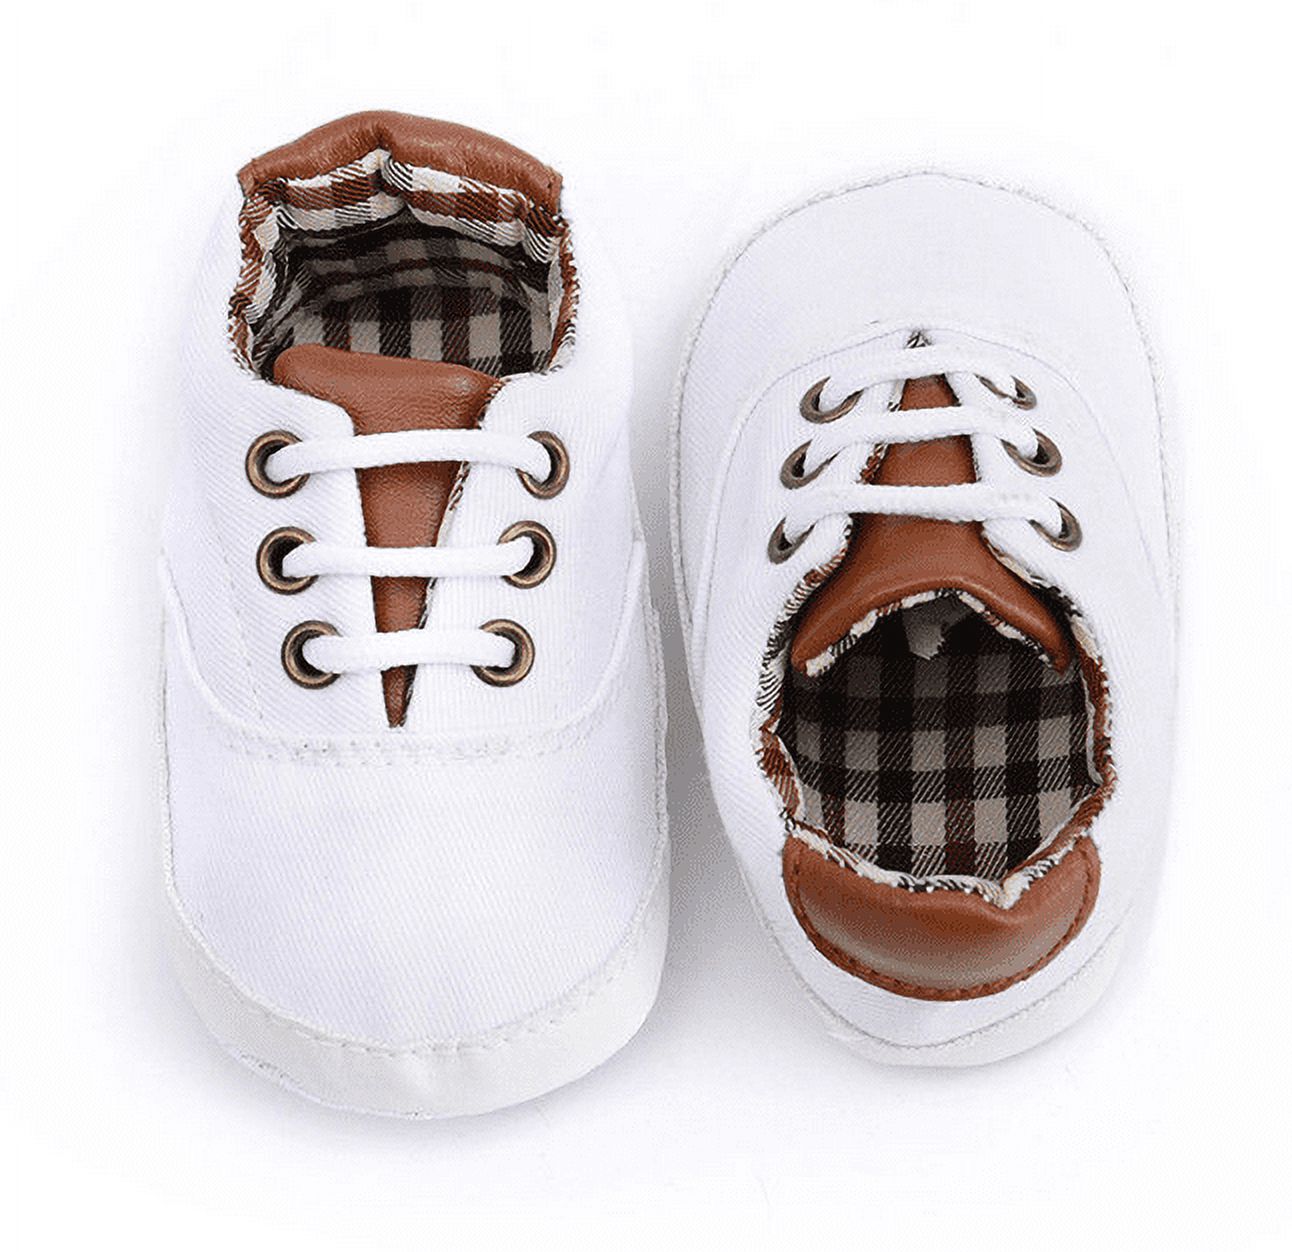 Baby Summer Shoes Newborn Baby Girl Boys Canvas Soft Sole Pram Shoes Anti-Slip Patchwork Sneakers Moccasin Prewalker First Walker - image 3 of 4